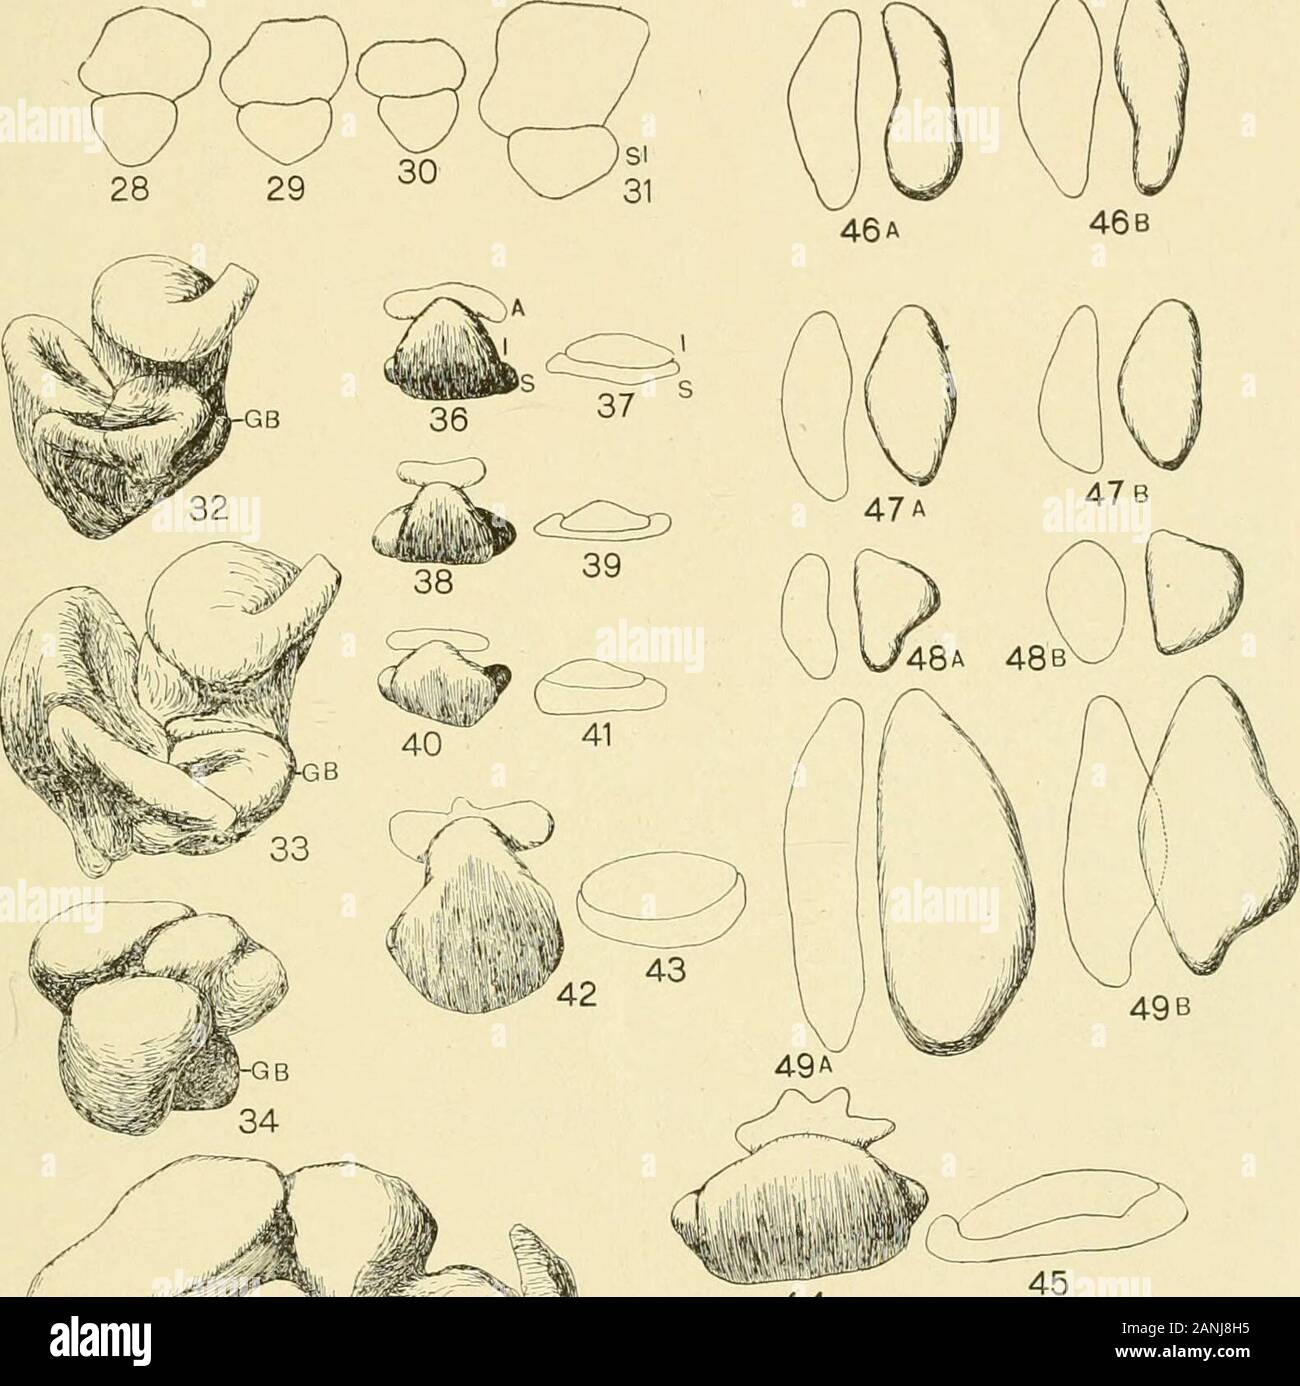 The Journal of experimental zoology . live: Tot., 72 mm., B.,25 mm.; fixed: Tot., 68 mm., B., 24.5 mm. Thymus, X 28. Two views of each gland to show the three dimensions. 46 A and B Thyroidless larva. 5/2 to 6/1/18. Alive: Tot., 41 mm., B.,18 mm.; fixed: Tot., 41 mm., B., 17 mm. 47 A and B Control larva. 4/30 to 6/4/18. Alive: Tot , 43 mm , B., 18.;fixed: Tot., 40 mm., B., 17 mm. 48 A and B Control frog (same as fig. 40). 49 A and B Thyroidless larva (same as fig. 35). Epithelioid (parathyroid) bodies, X 40.8. Ventral view of the two pairs fromeach animal 50 Control larva (same as fig. 29). 51 Stock Photo